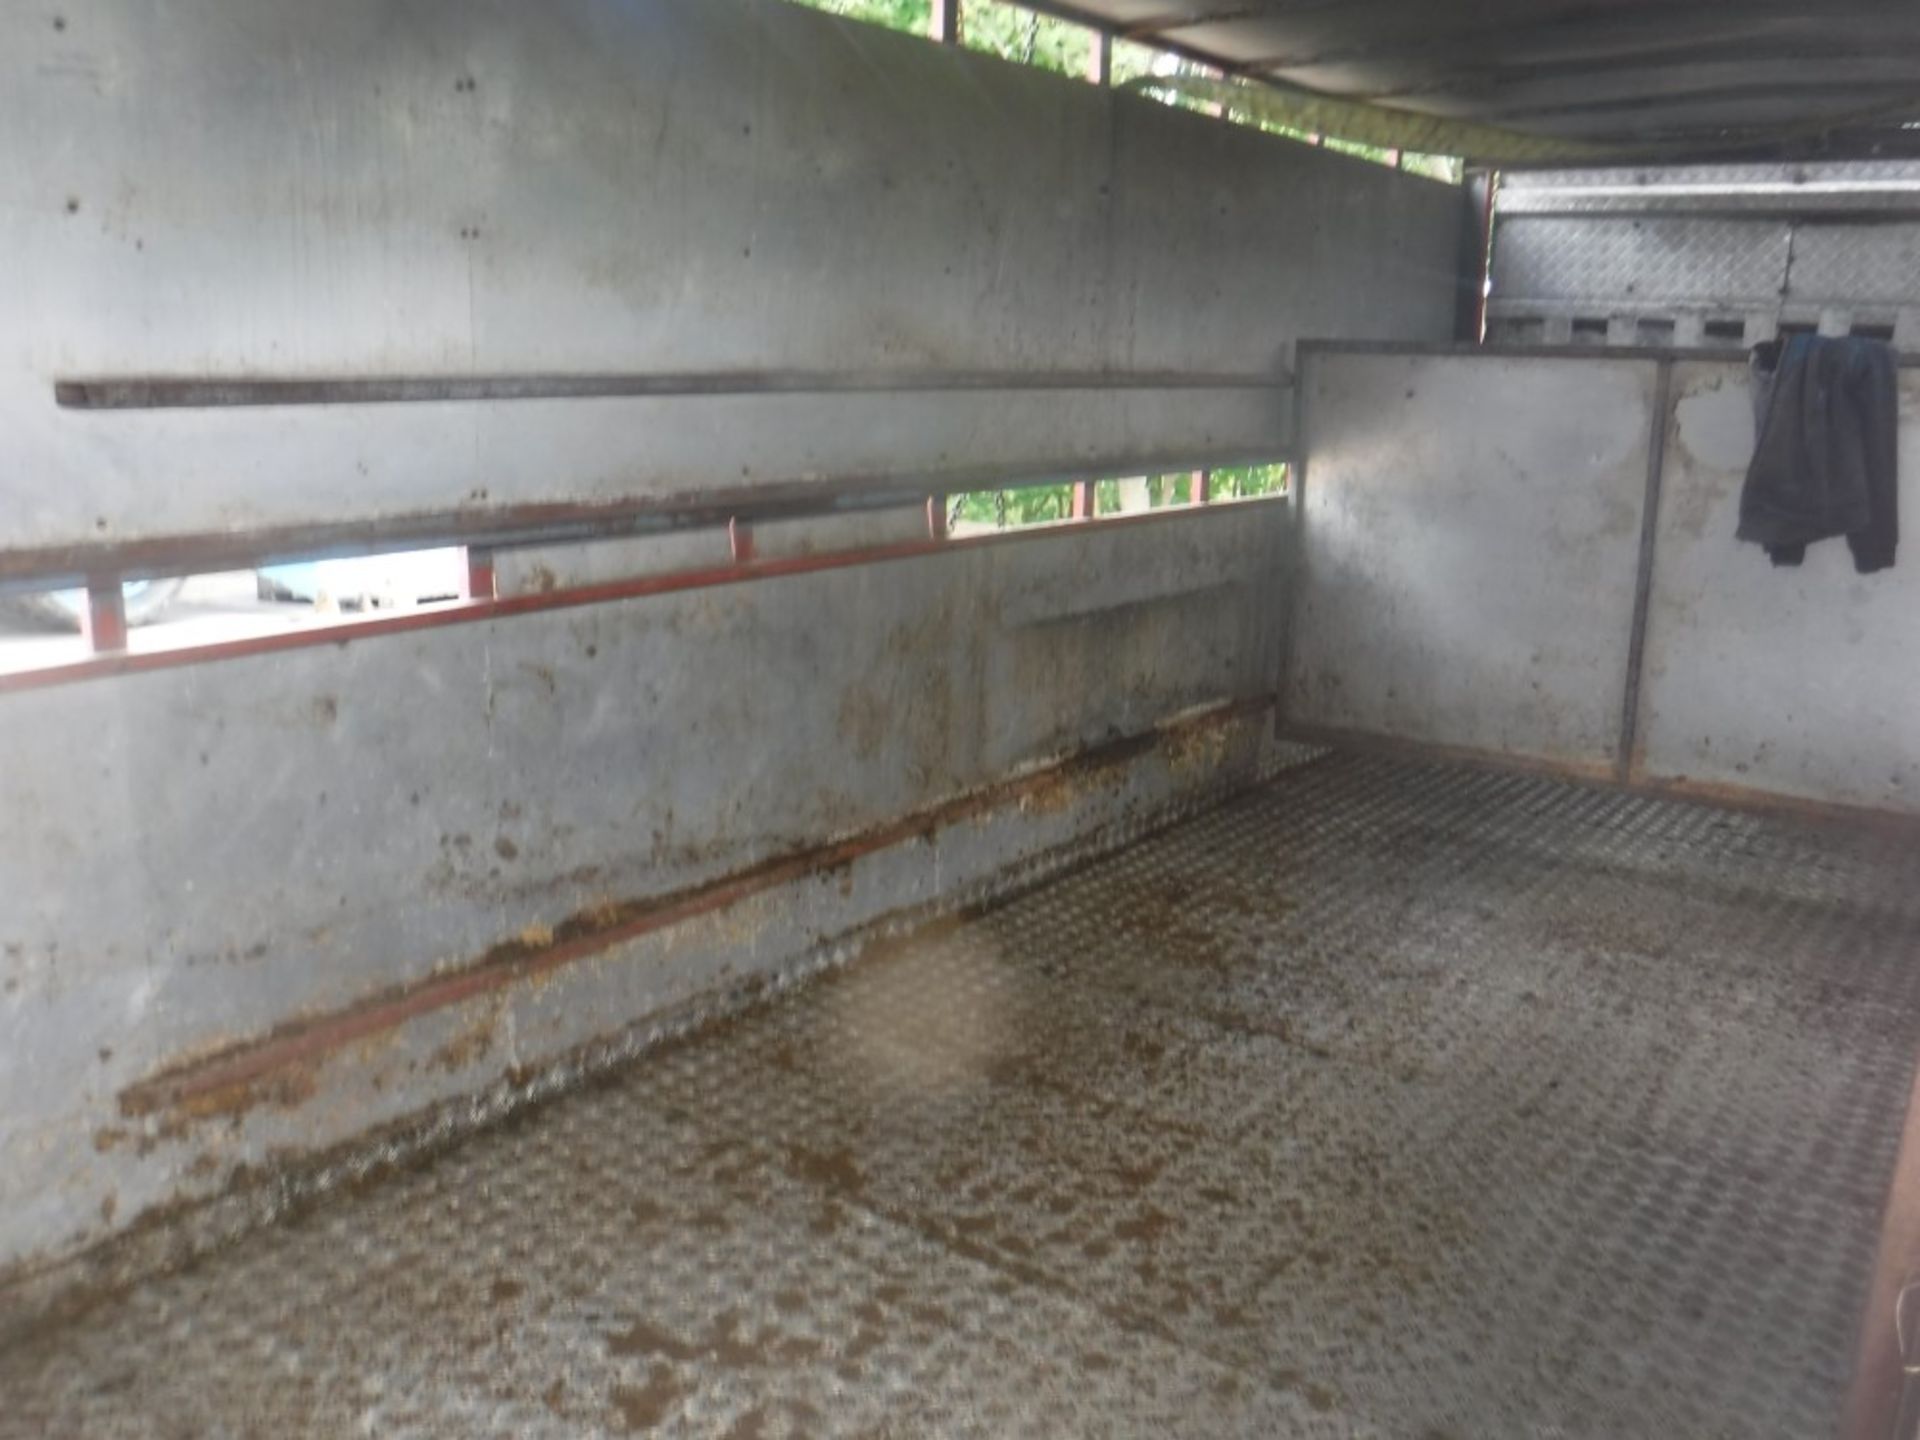 ALLEY HORSE BOX CONTAINER, CHEQUERED PLATE FLOOR, 20' X 7'5" X 6'8", VERY GOOD CONDITION [+ VAT] - Image 6 of 6